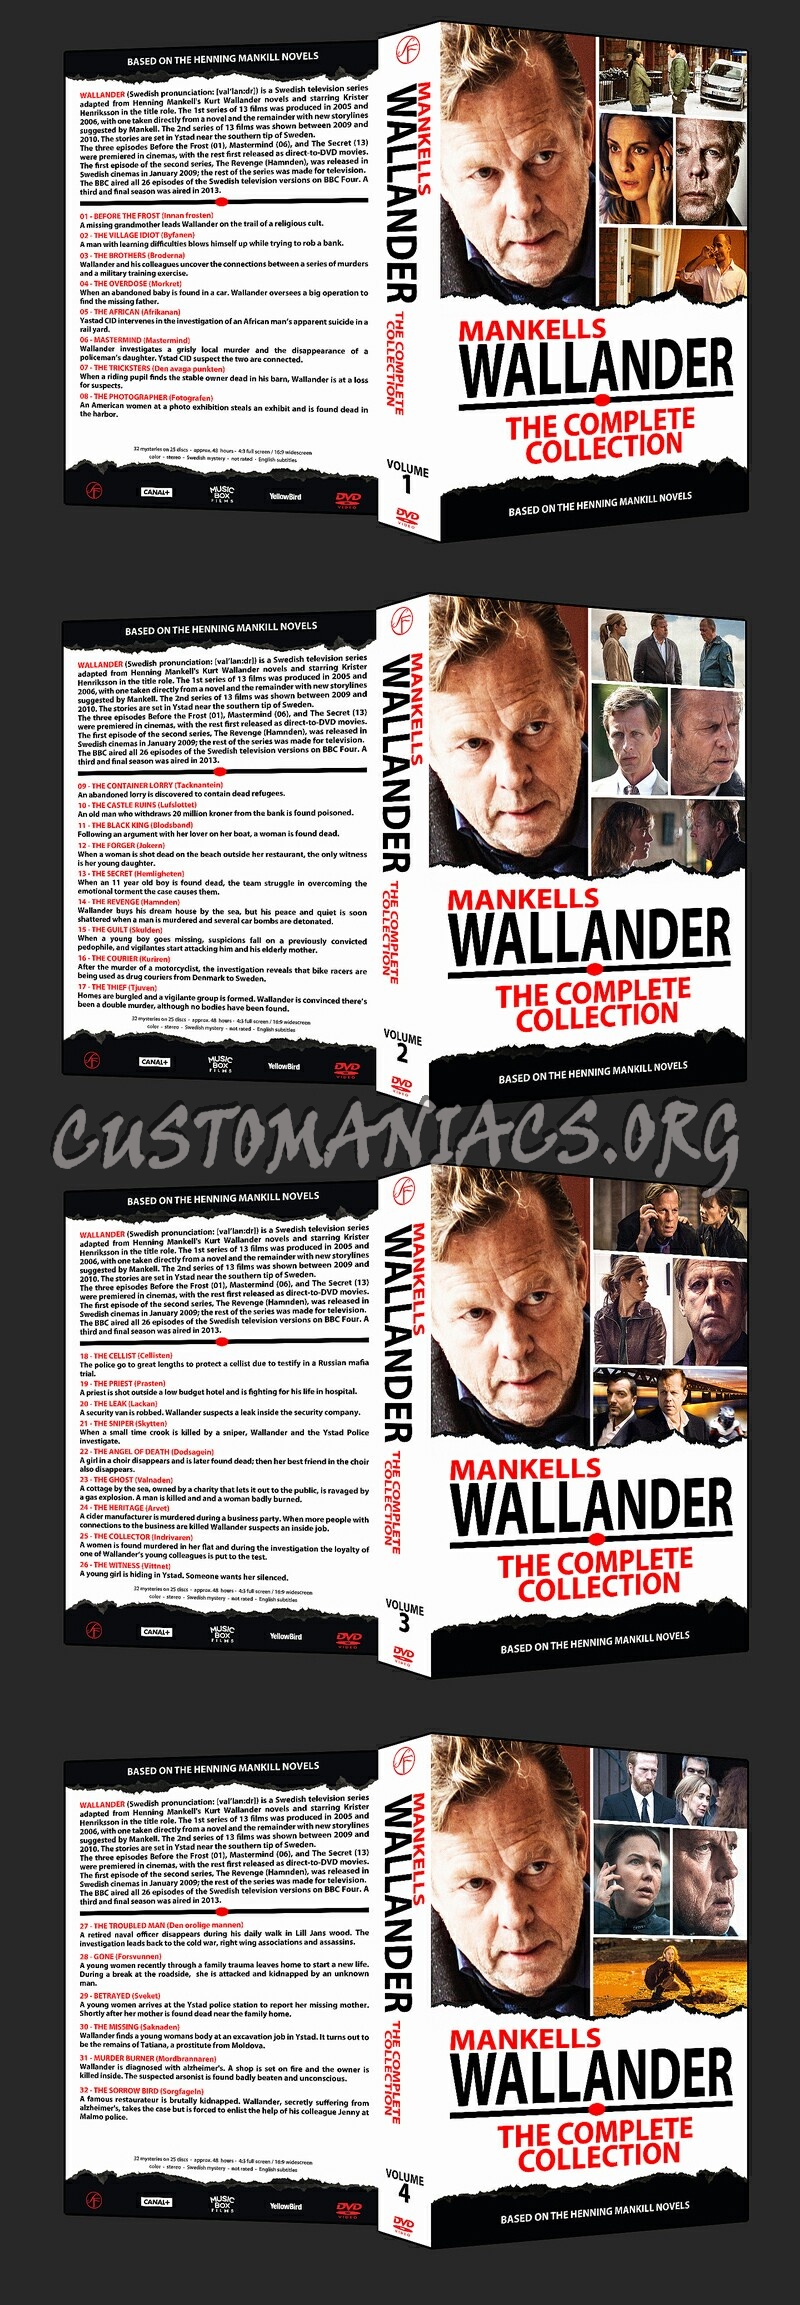 WALLANDER - The Complete Collection dvd cover